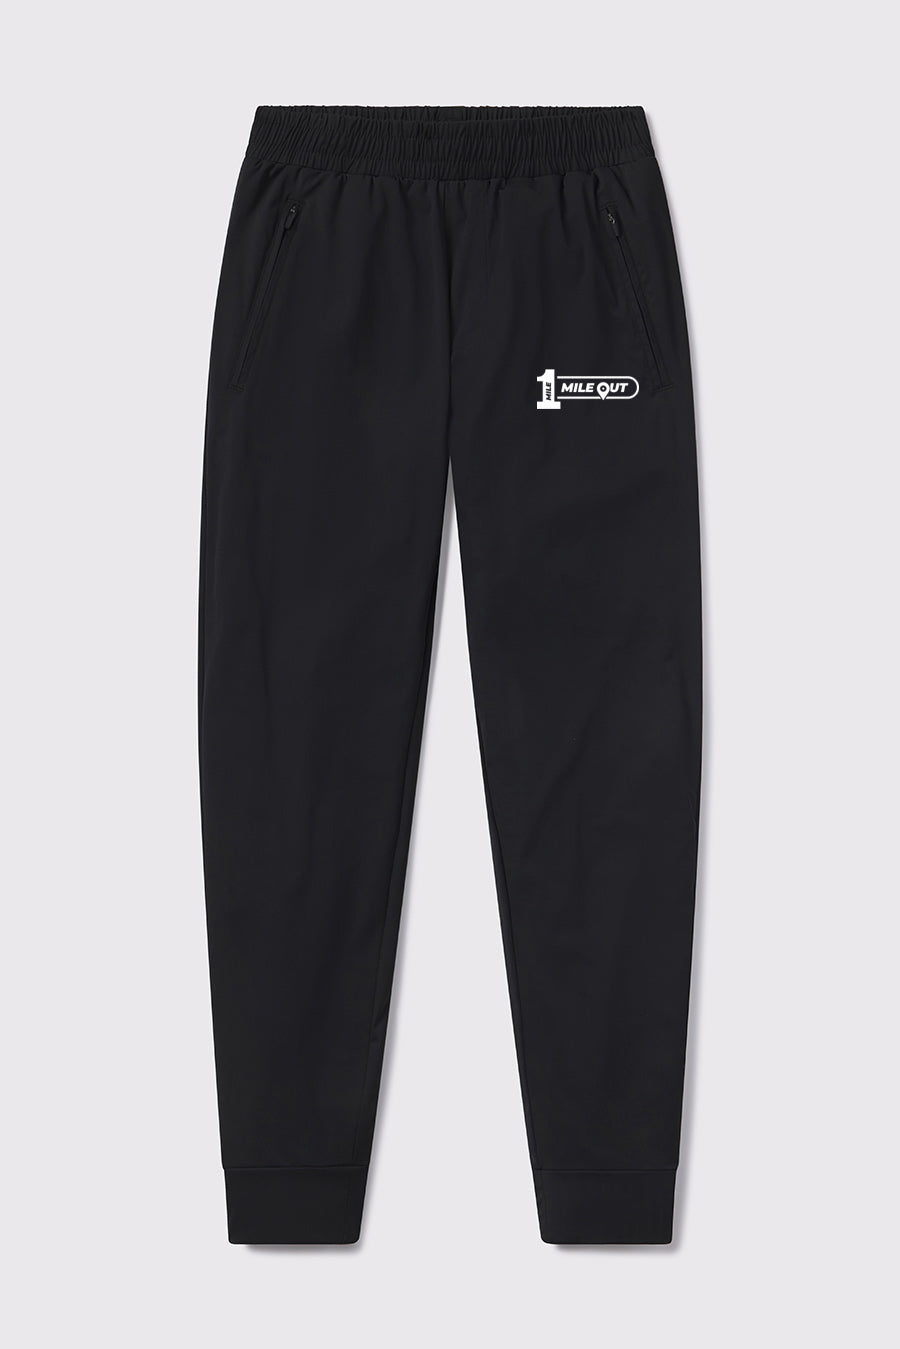 One Mile Out Ultralight Jogger – Barbell Apparel